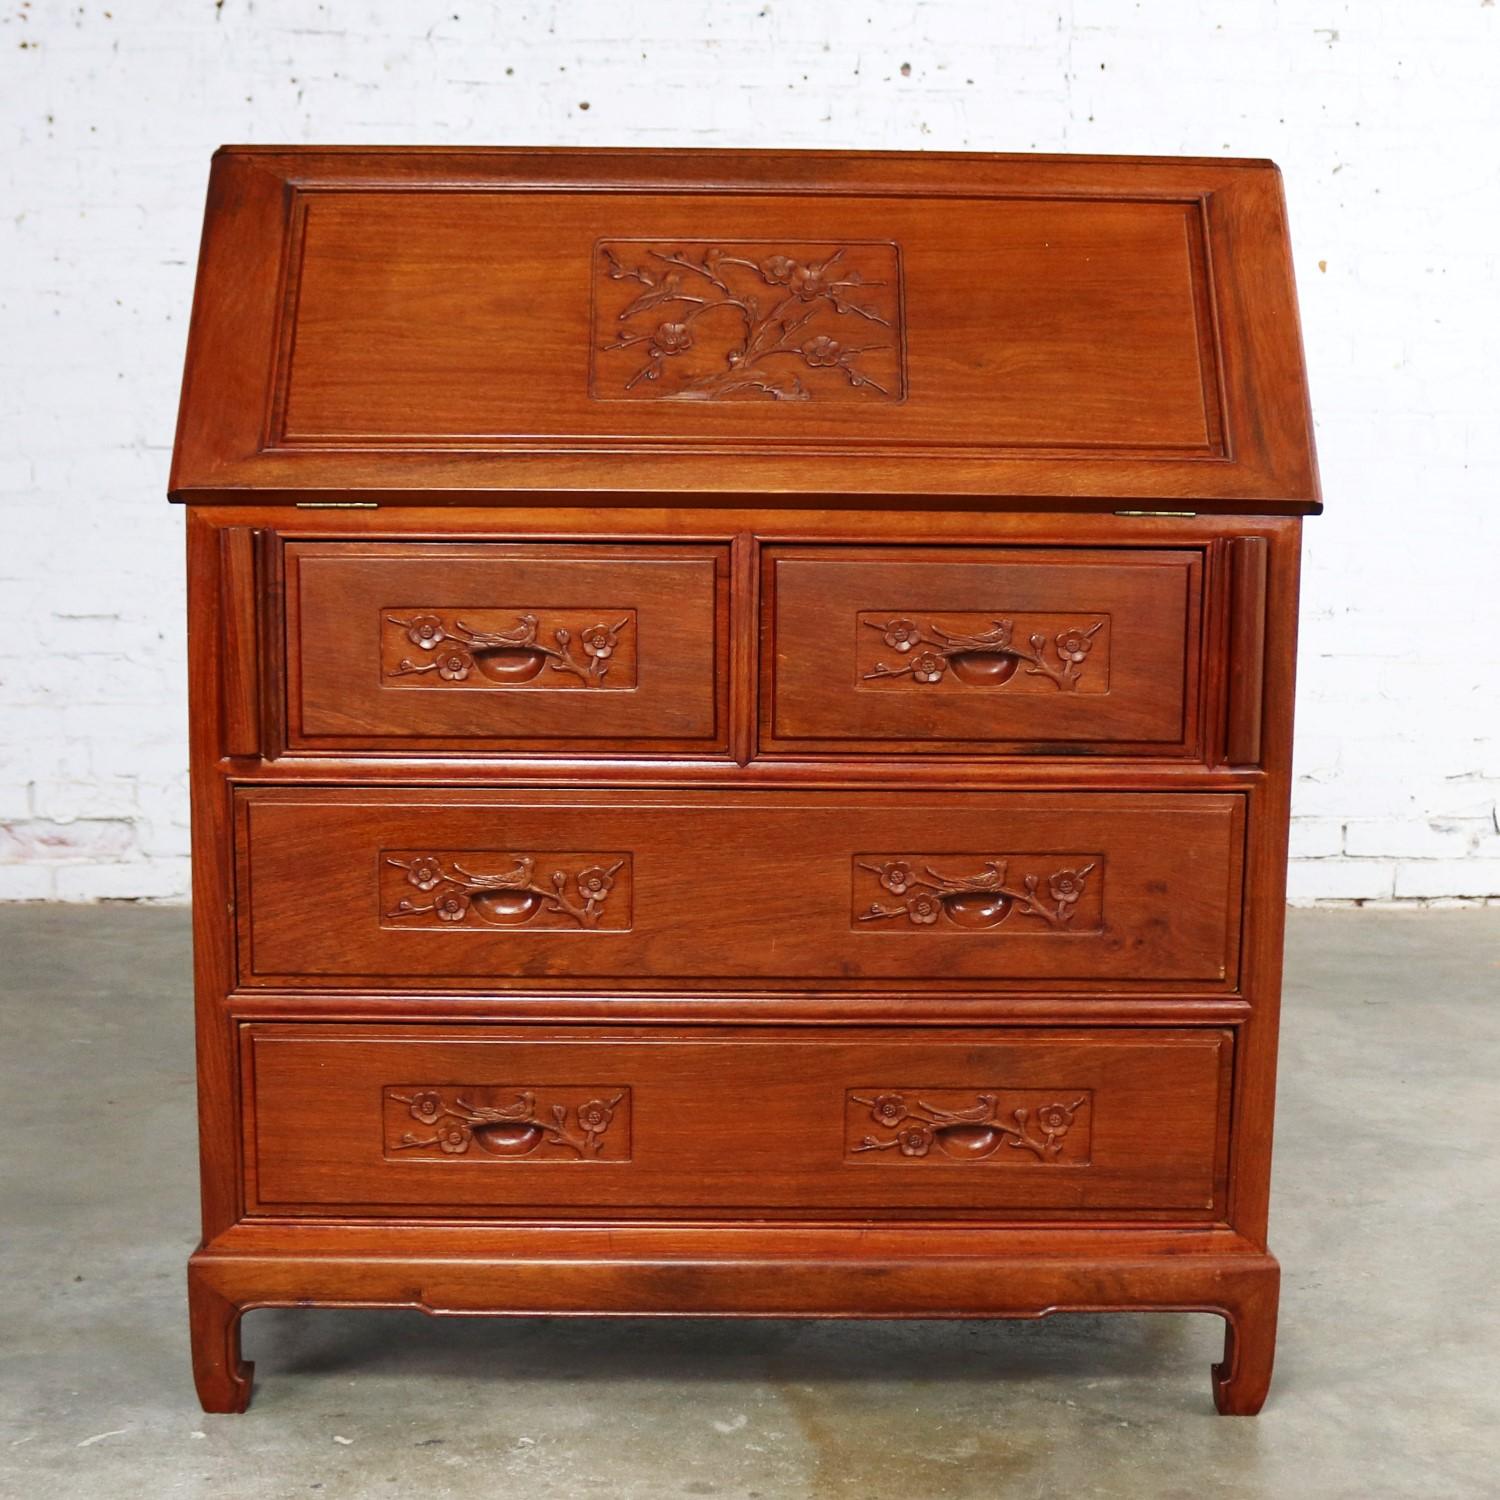 Chinoiserie Asian Teak Hand Carved Drop Front Compartmentalized Desk Style of George Zee For Sale